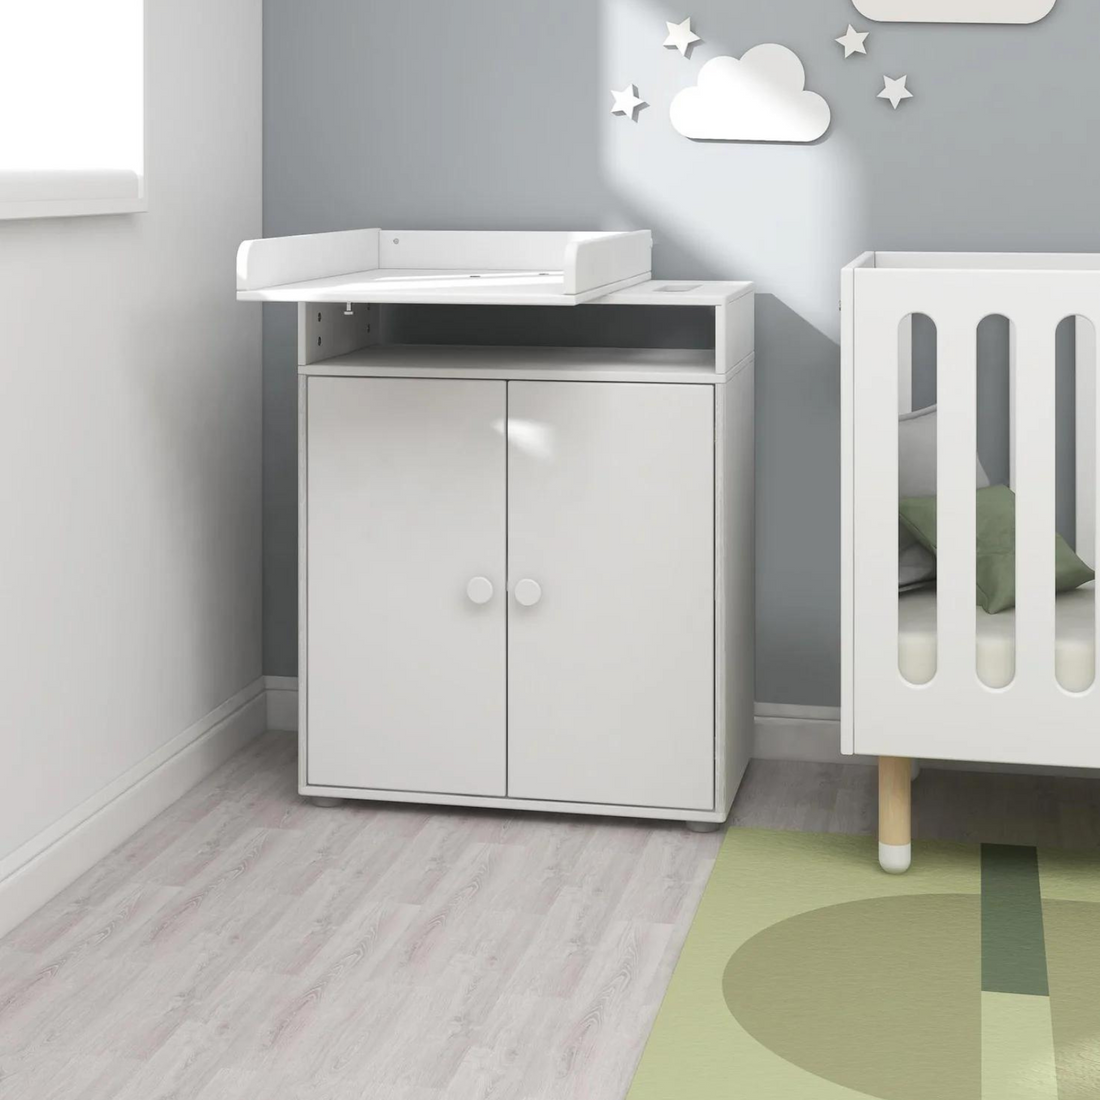 Flexa Changing Table example in baby room